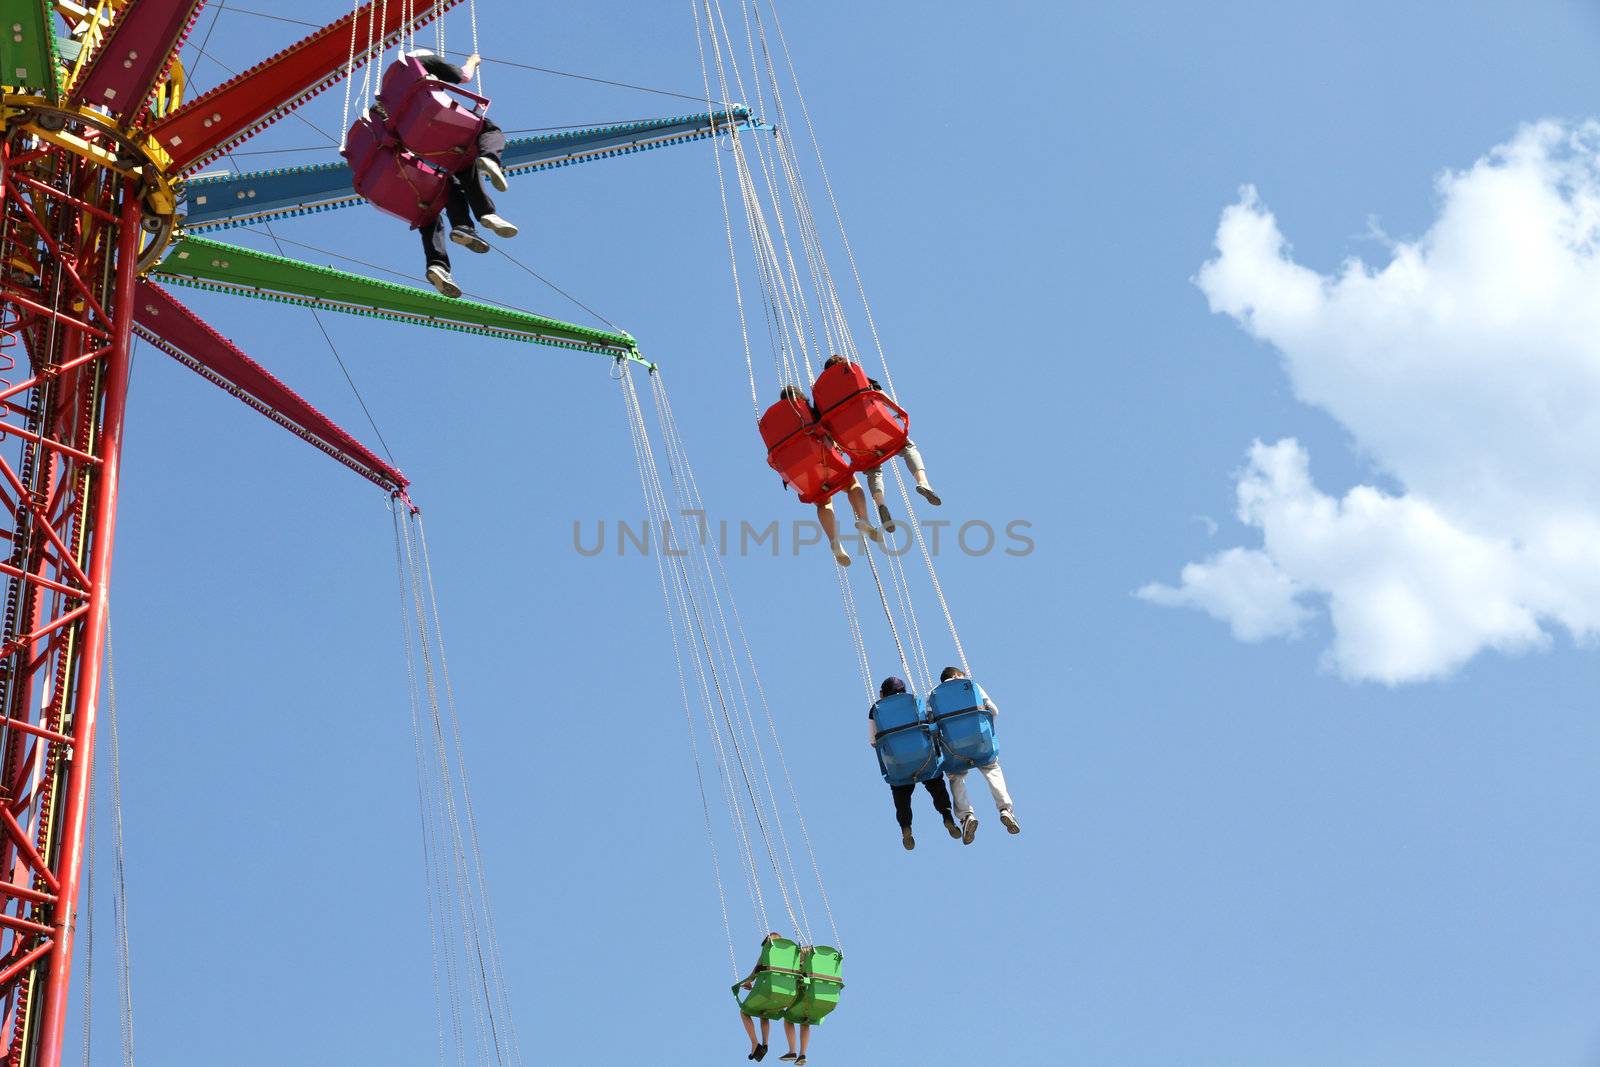 Colored carousel in an amusement park against blue sky